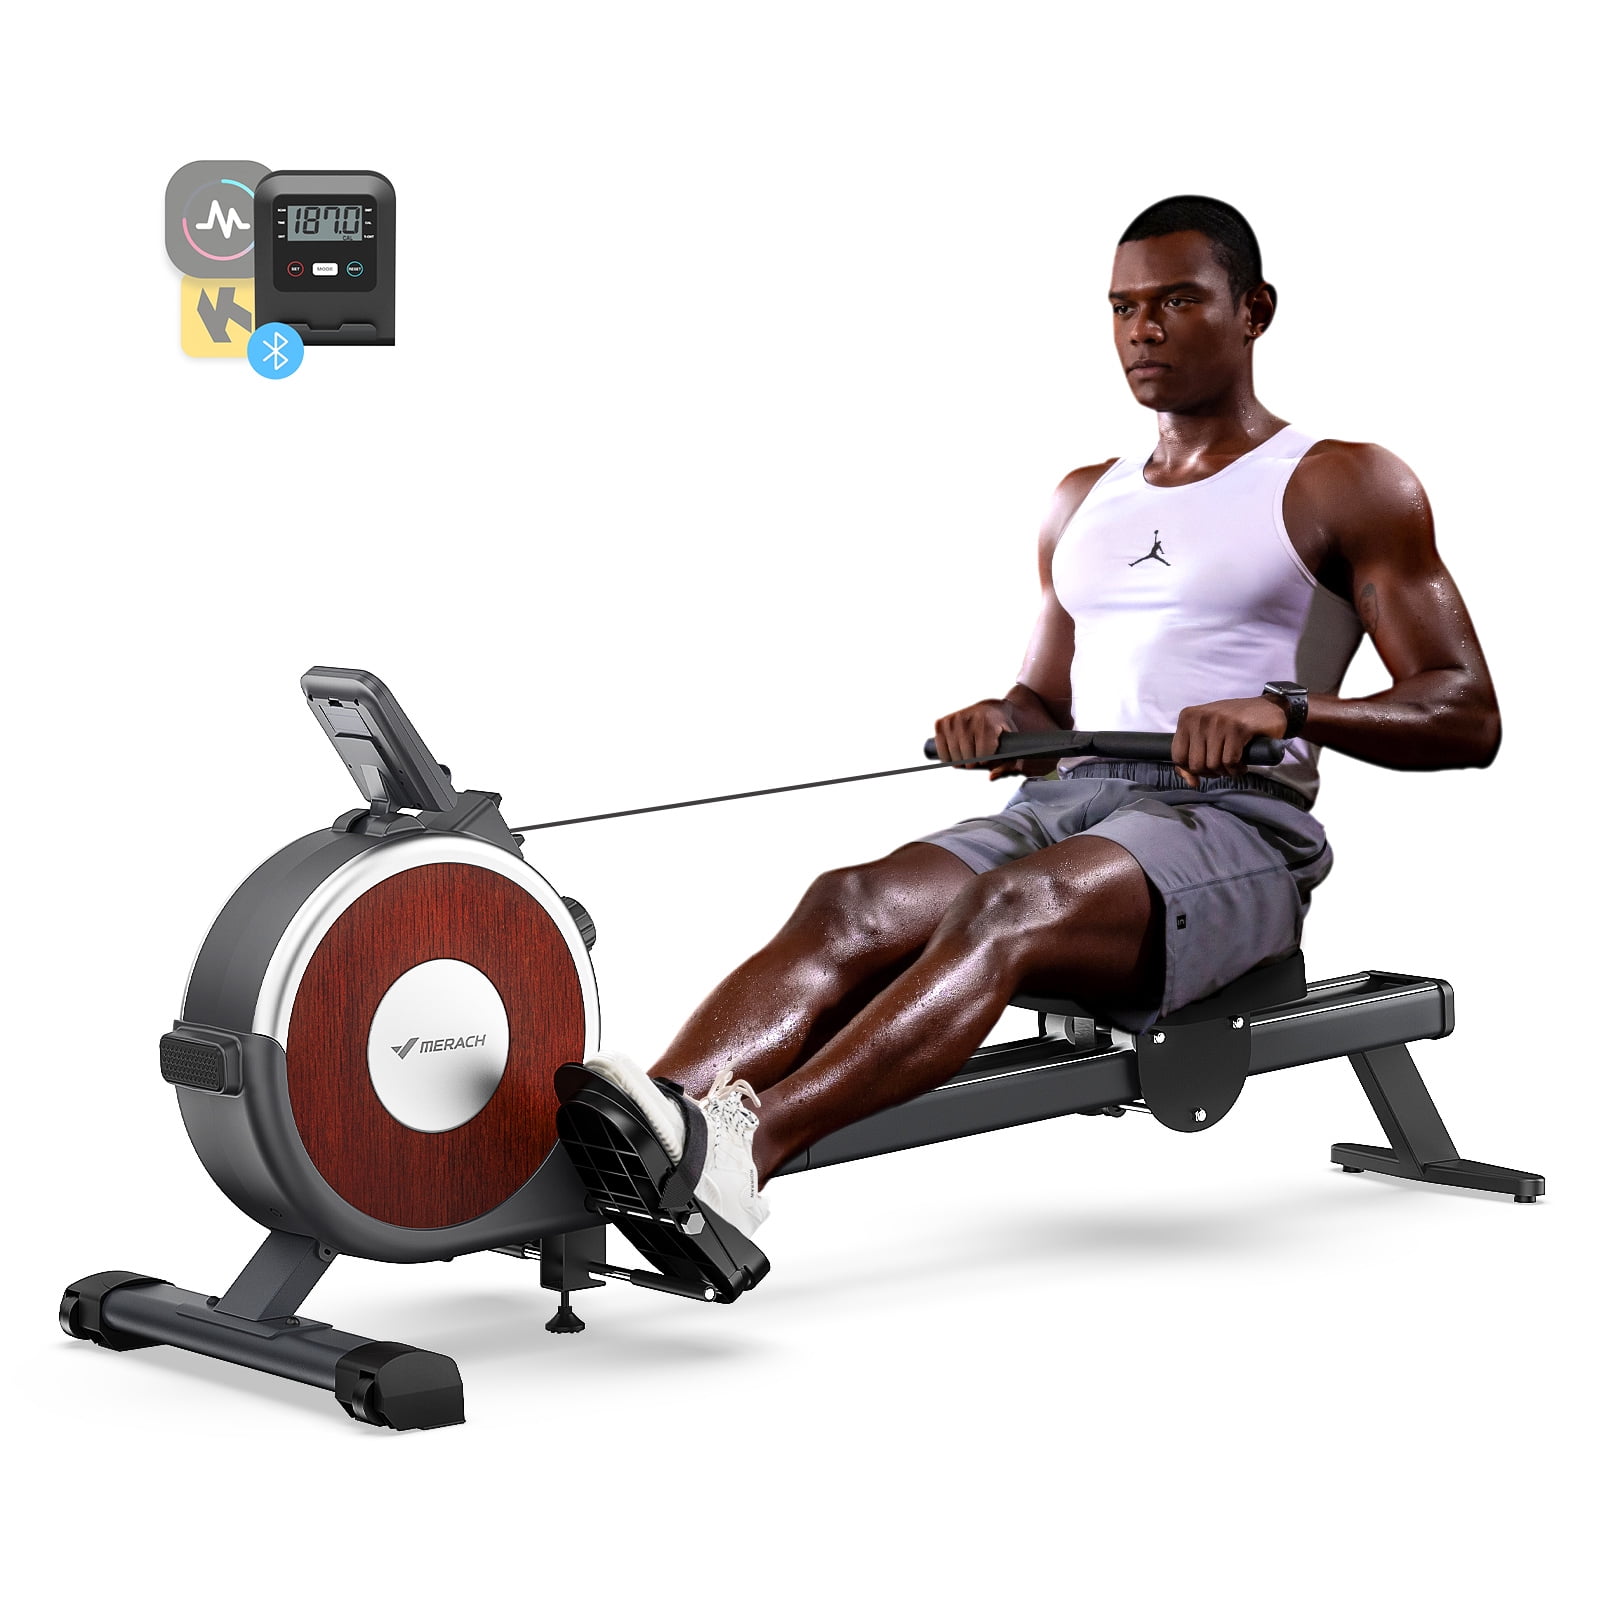 Total Gym Ergonomic Incline Rowing Machine with 6 Levels of Resistance